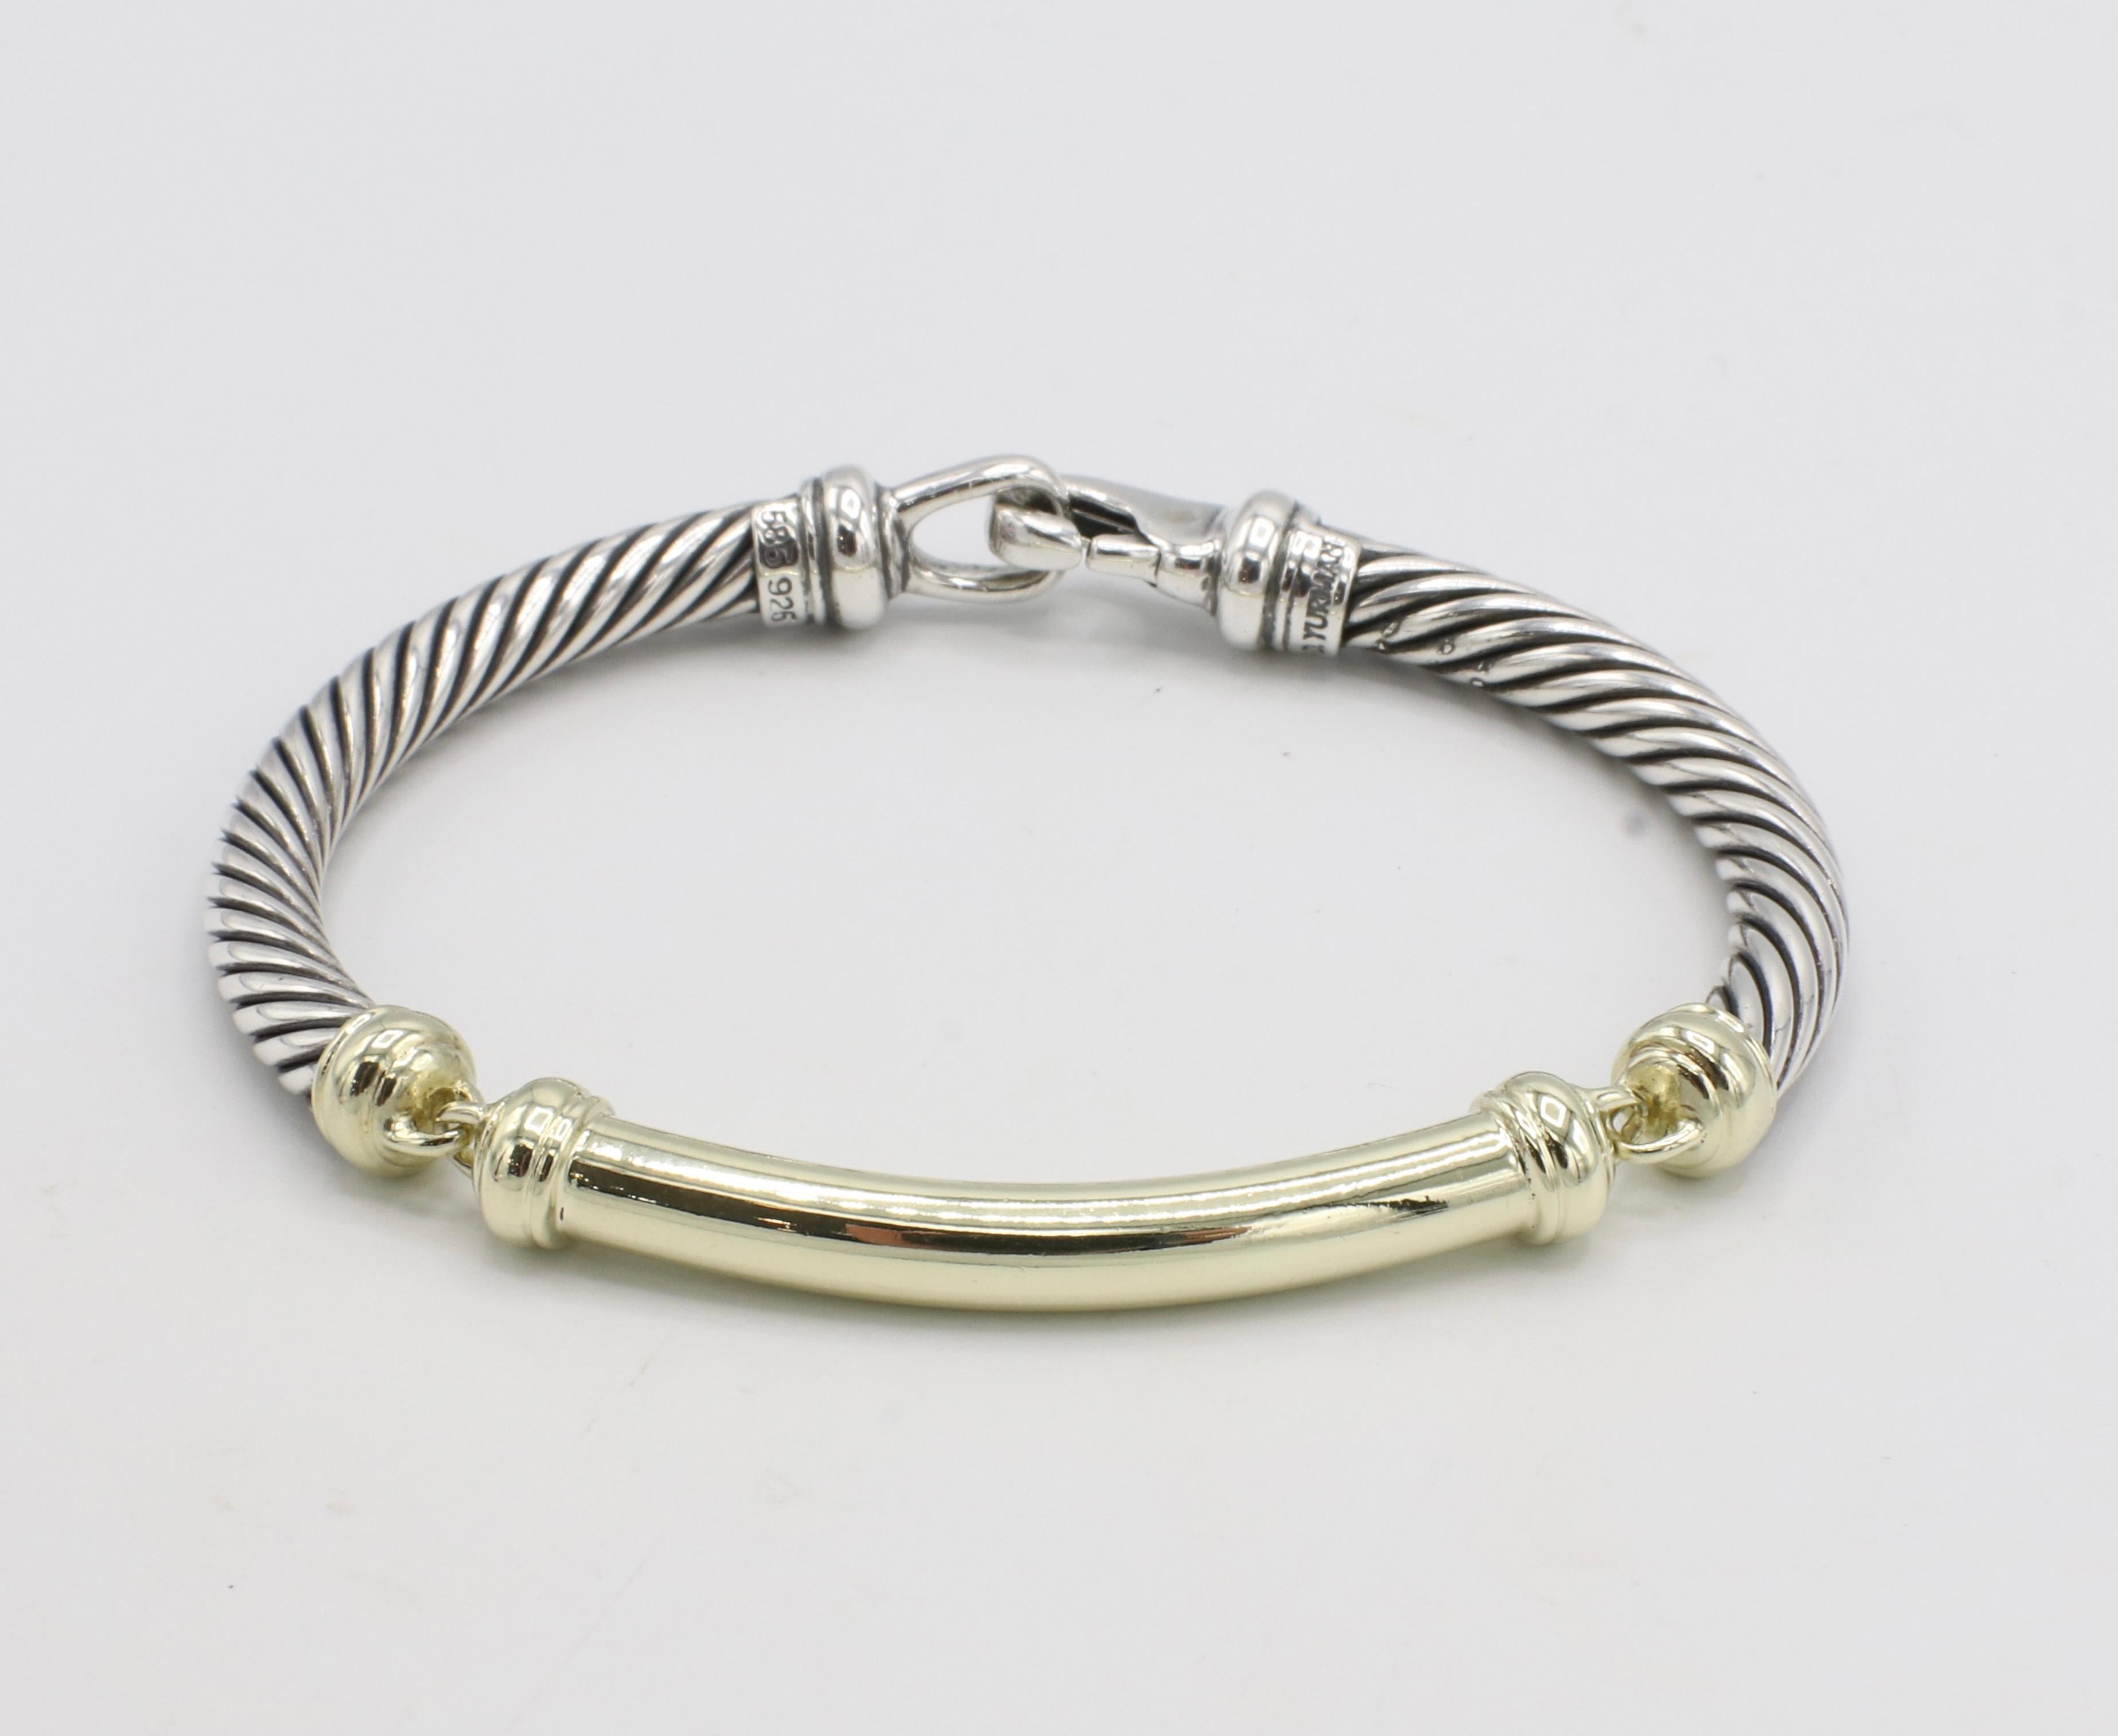 David Yurman Sterling Silver & Gold Cable Bar Station Bracelet 
Metal: Sterling silver & 14k yellow gold
Weight: 27.5 grams
Width: 5mm
Circumference: 6.5 inches
Diameter: 2.5 inches 
Signed: ©D. YURMAN 585 925